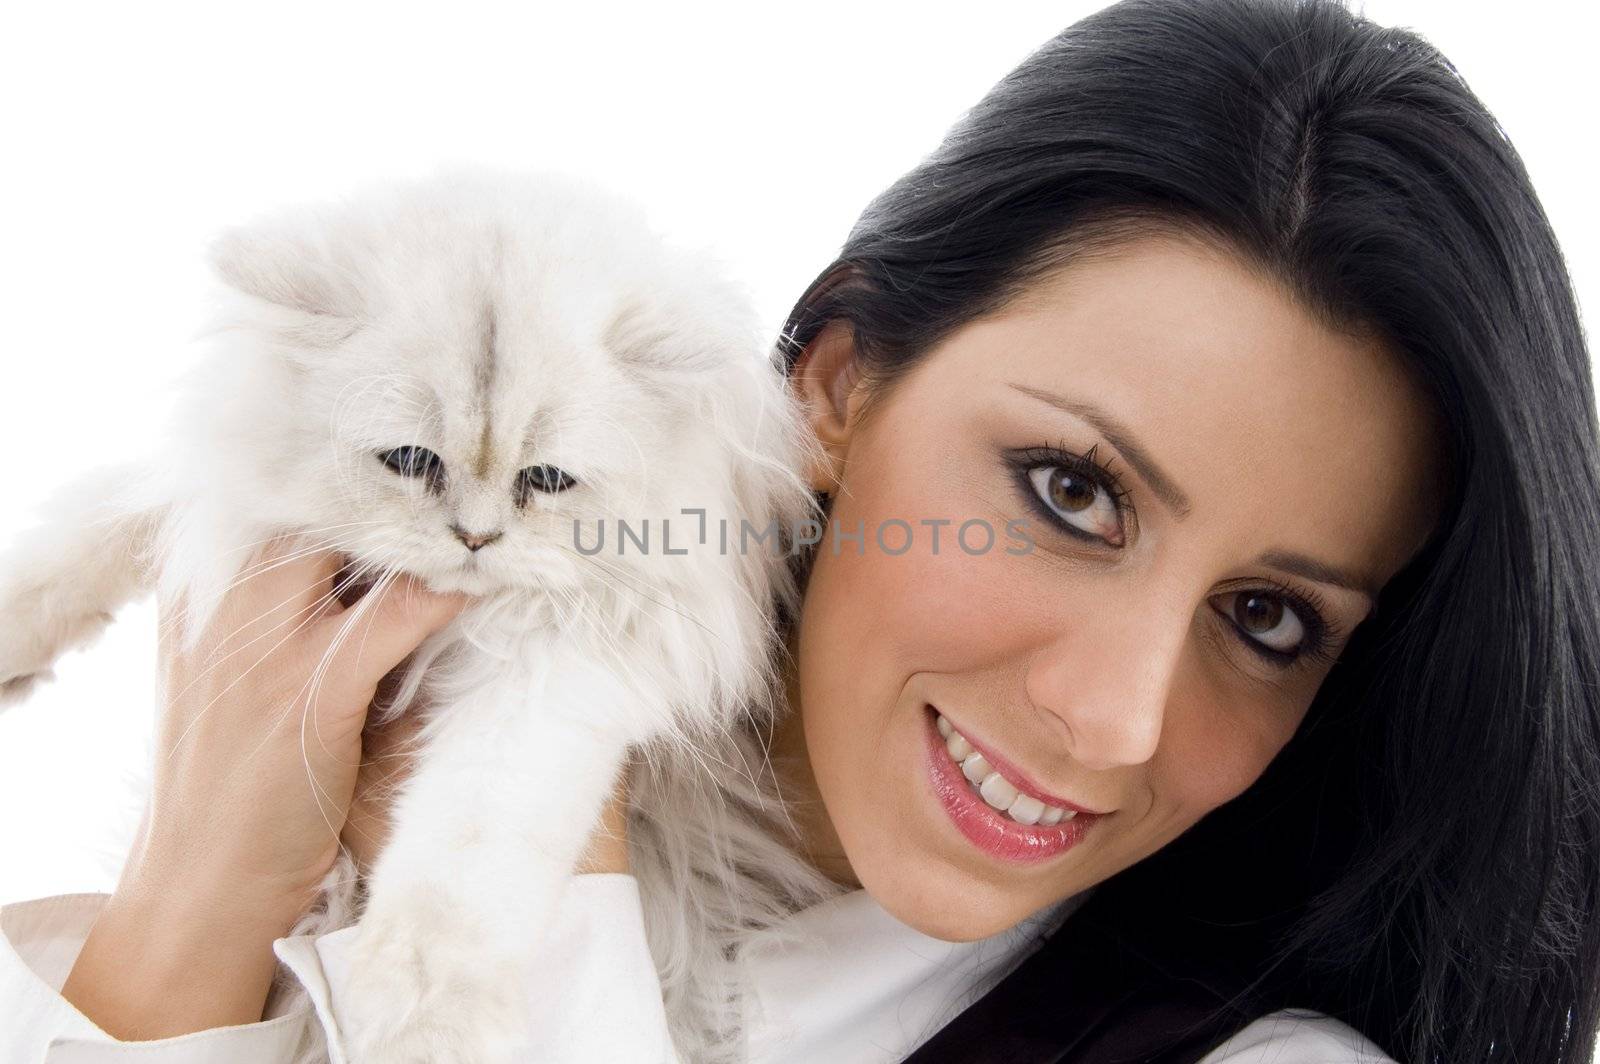 young model standing with white kitten by imagerymajestic